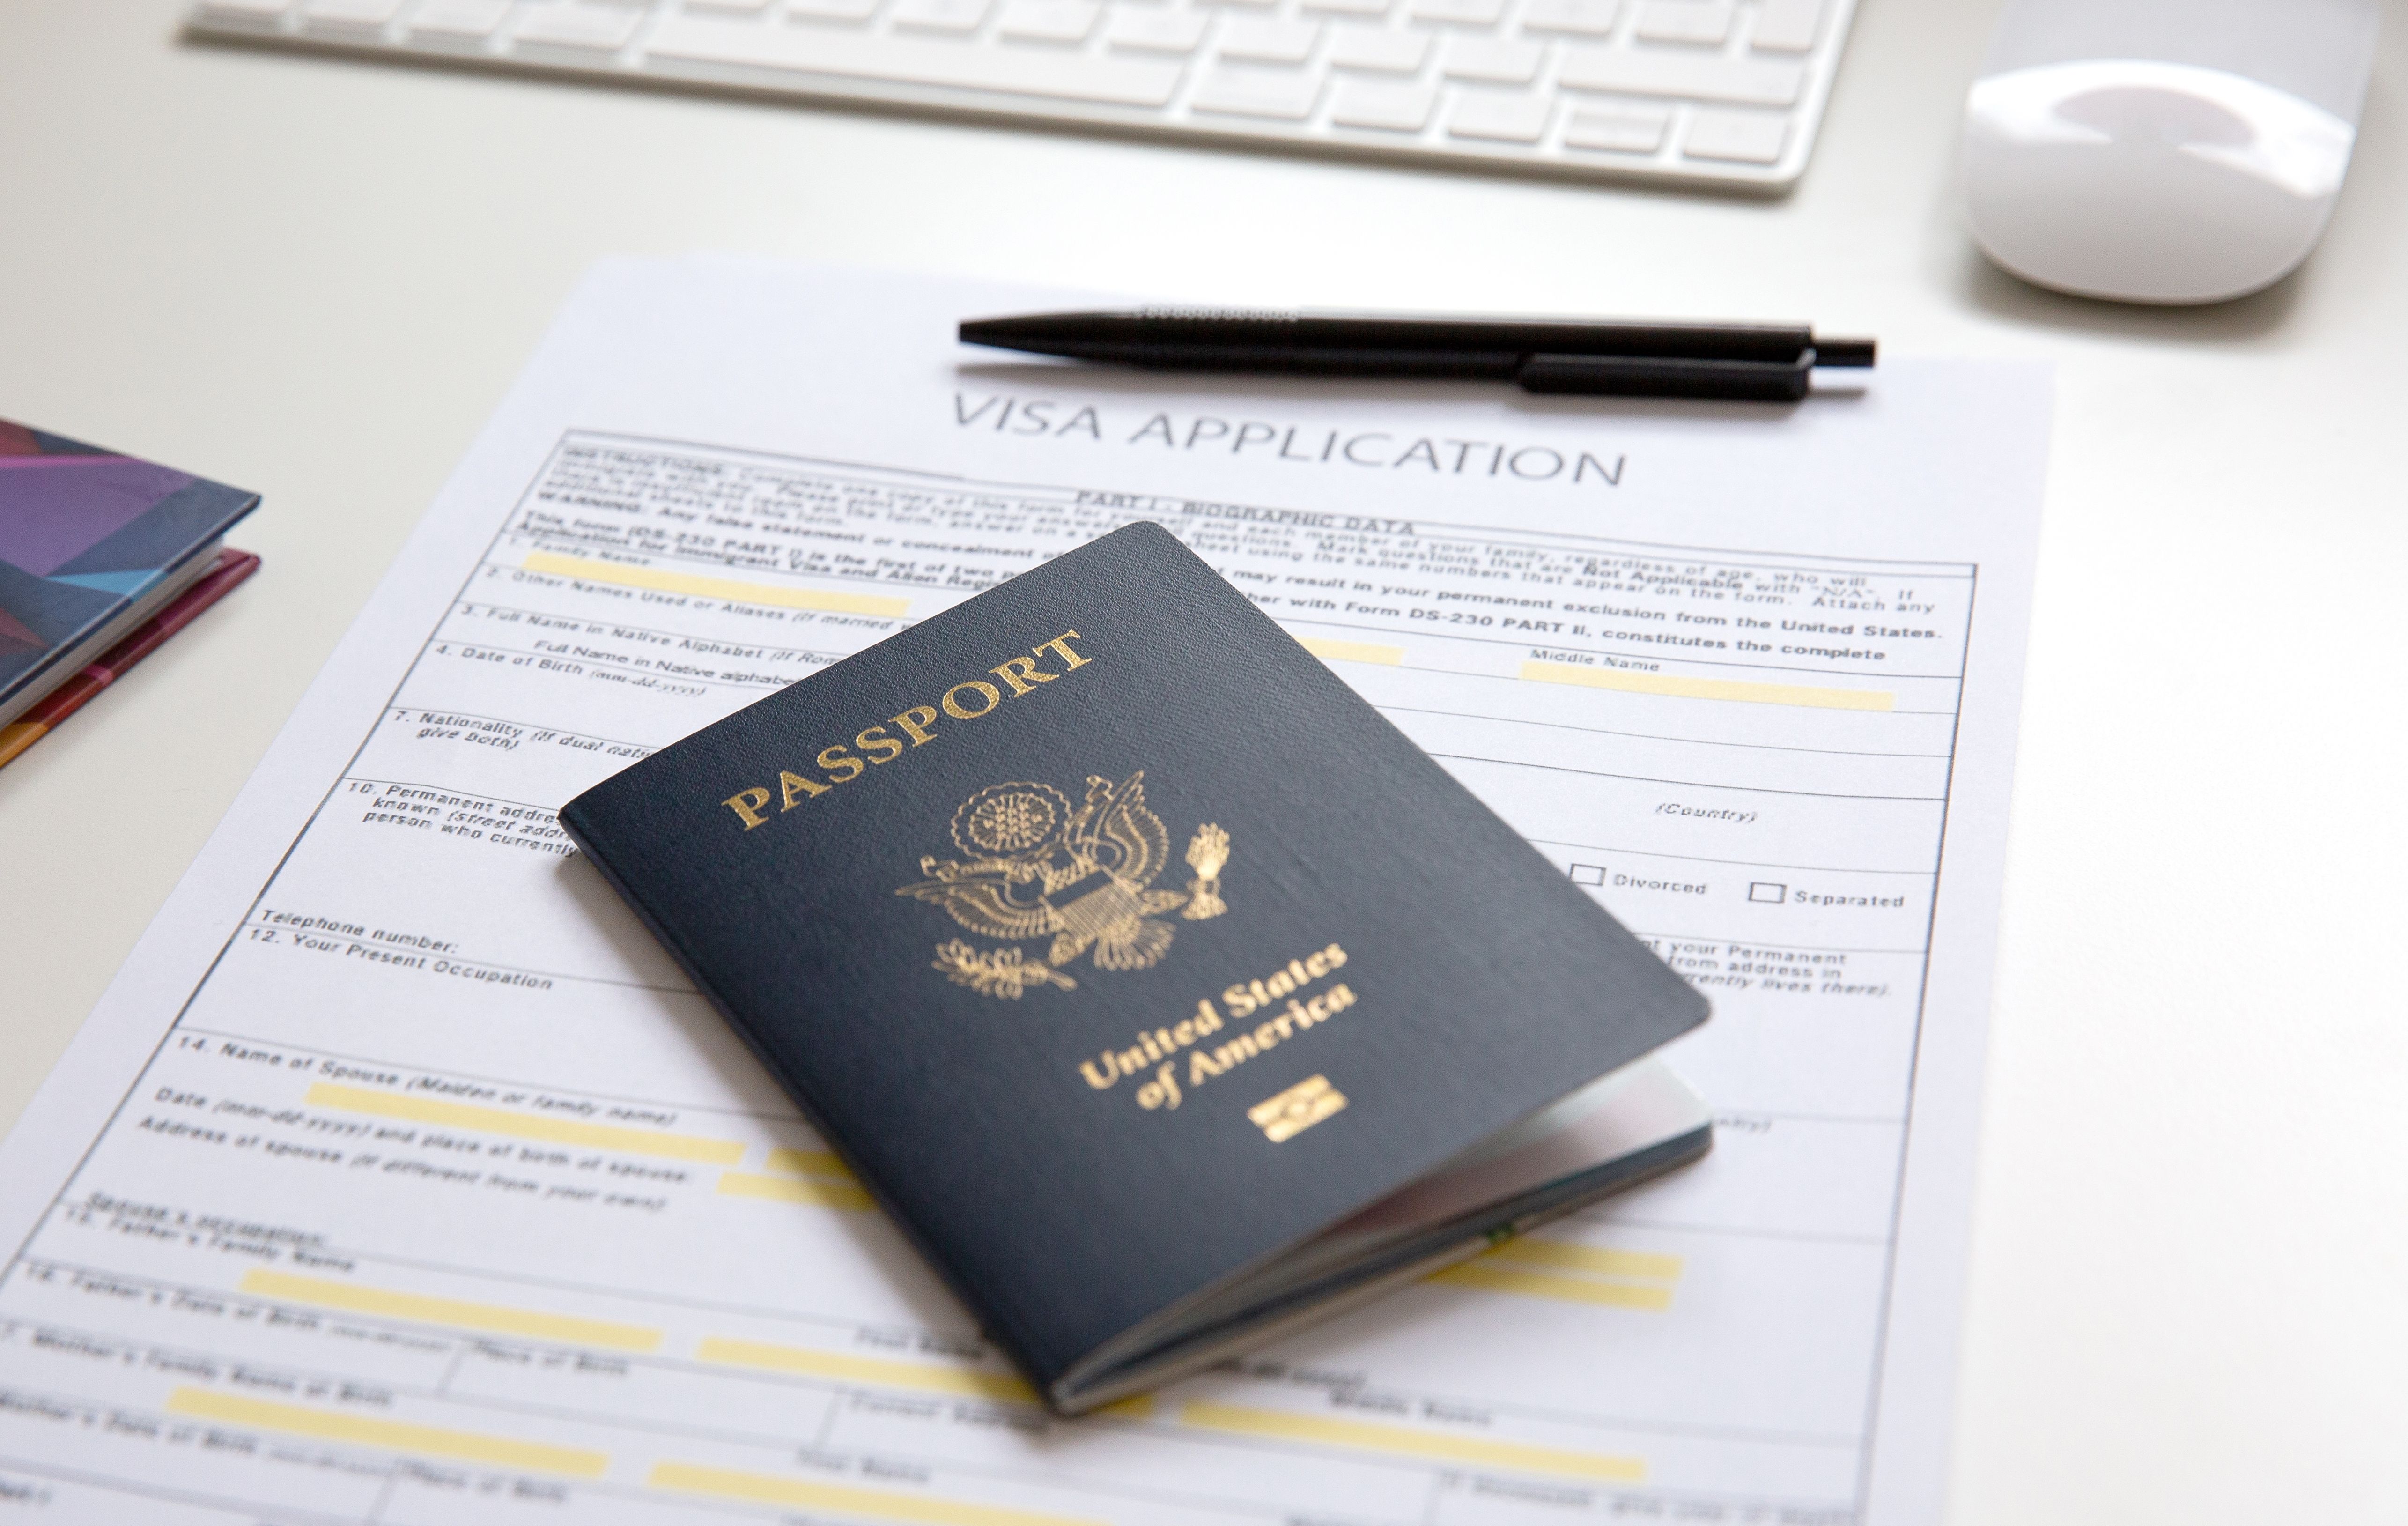 American passport with visa application documents, black pen and computer on white table